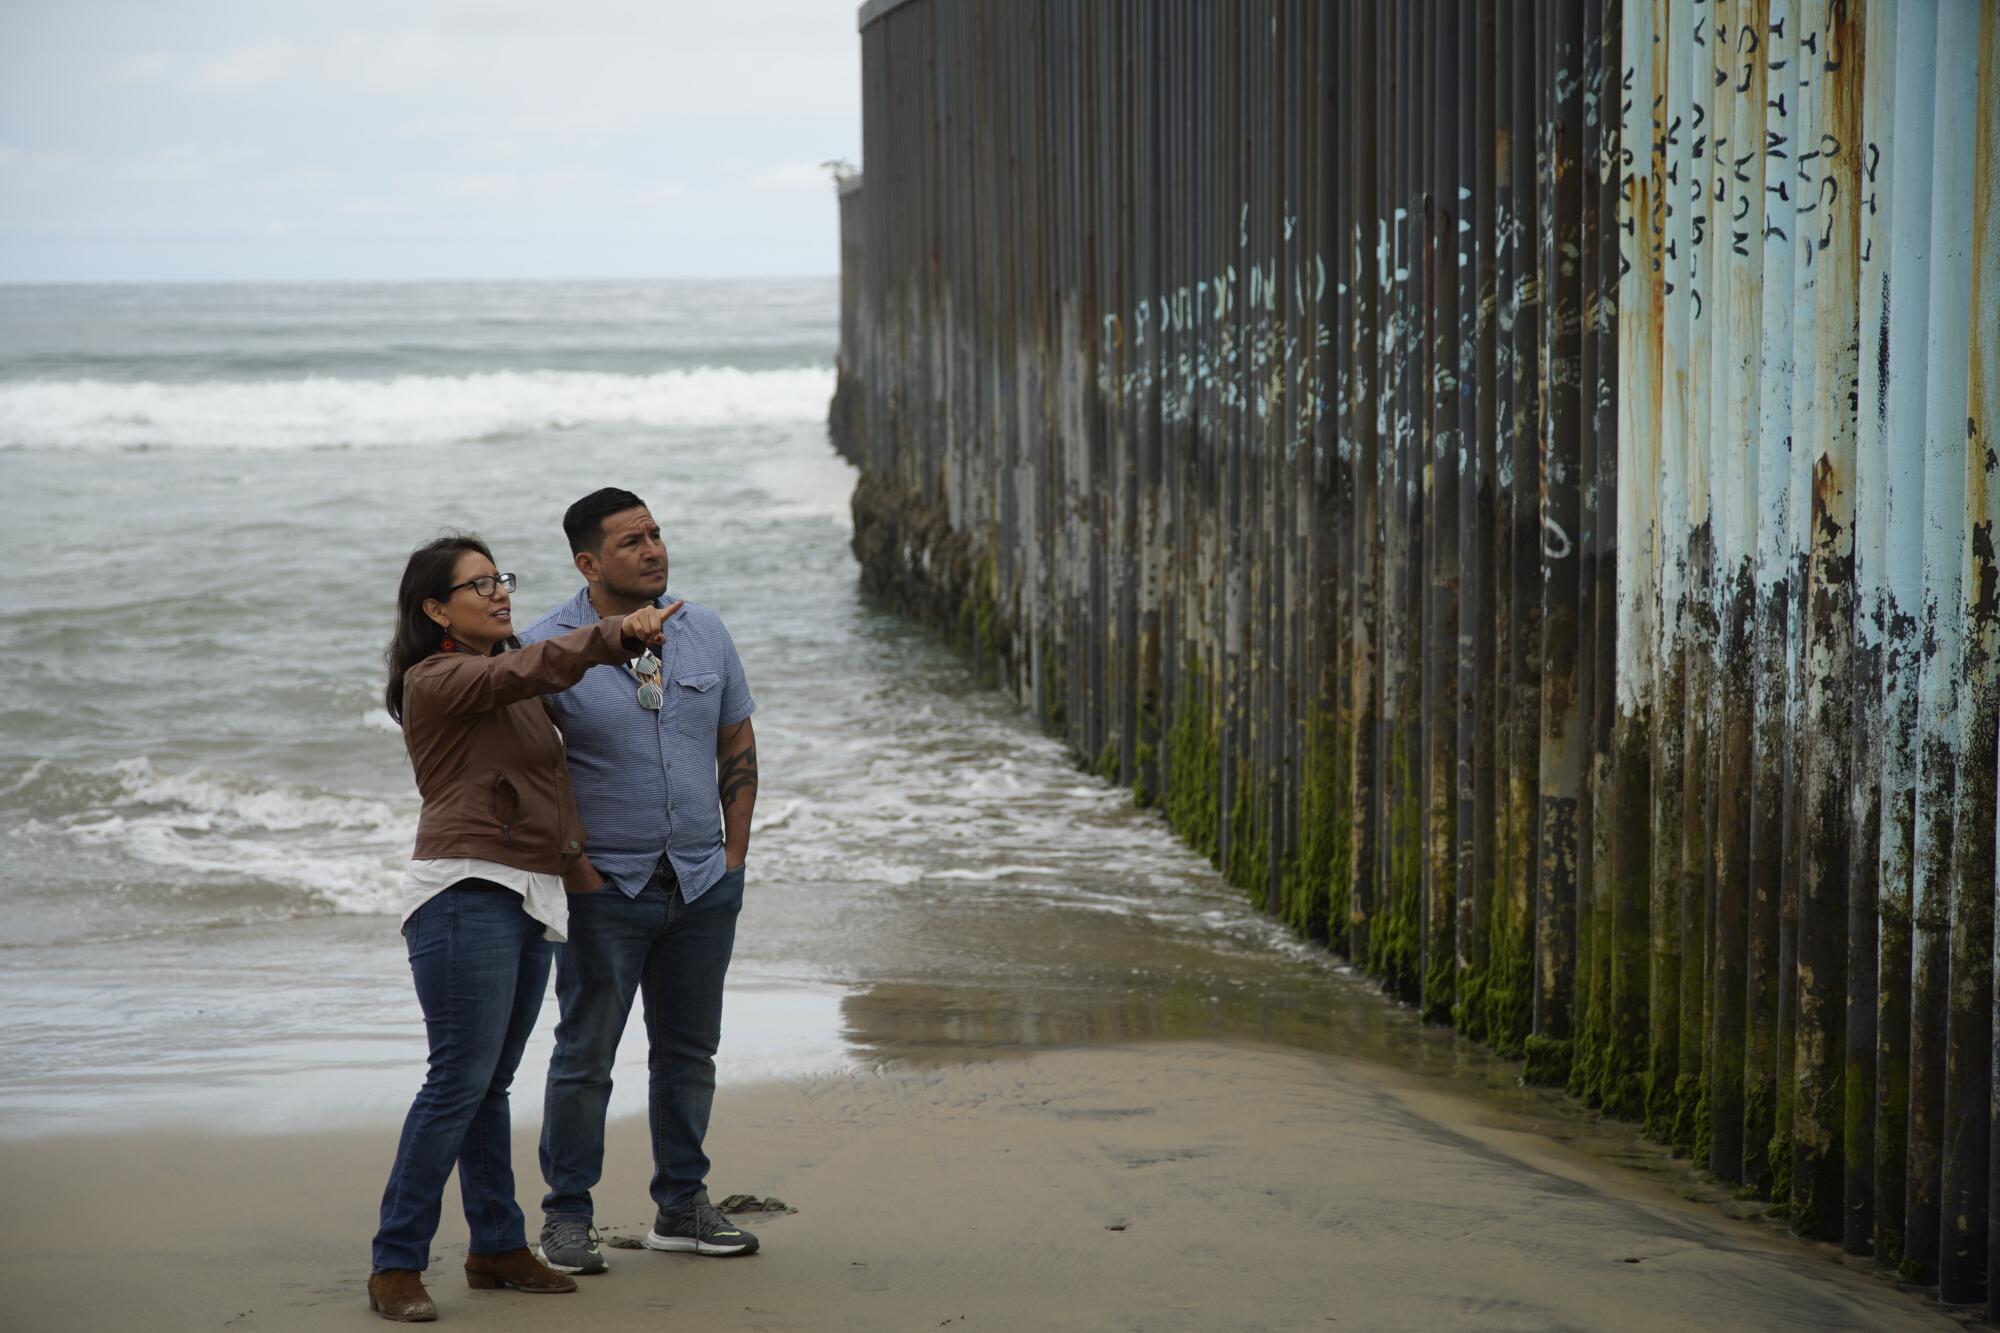 On her last day in Mexico, Dulce Garcia and her brother Edgar Garcia visit the border fence at Playas de Tijuana